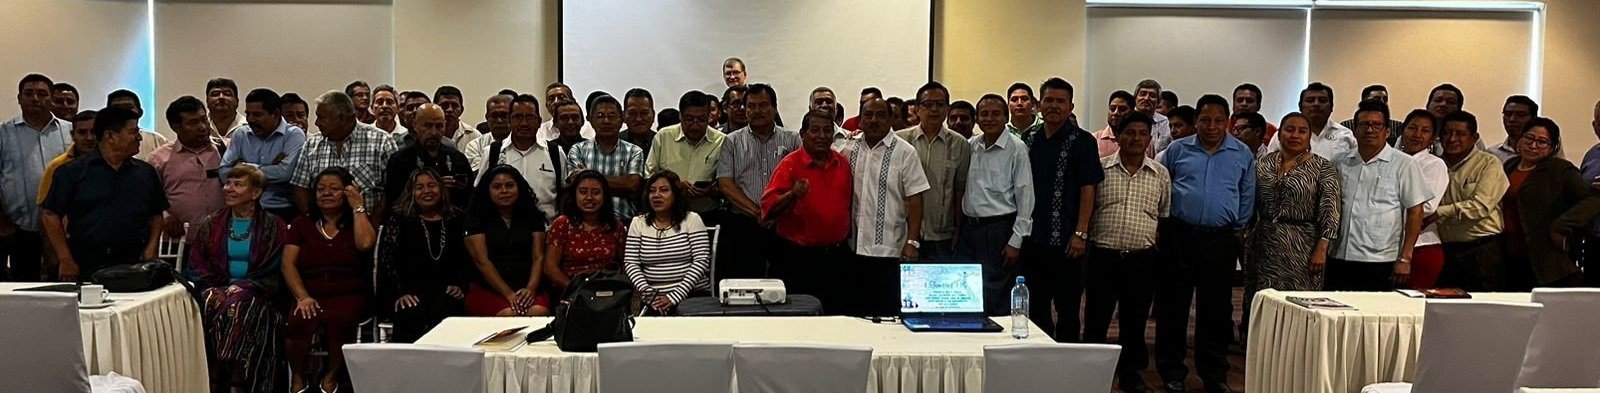   This is the entire group in leadership training in Tapachula  